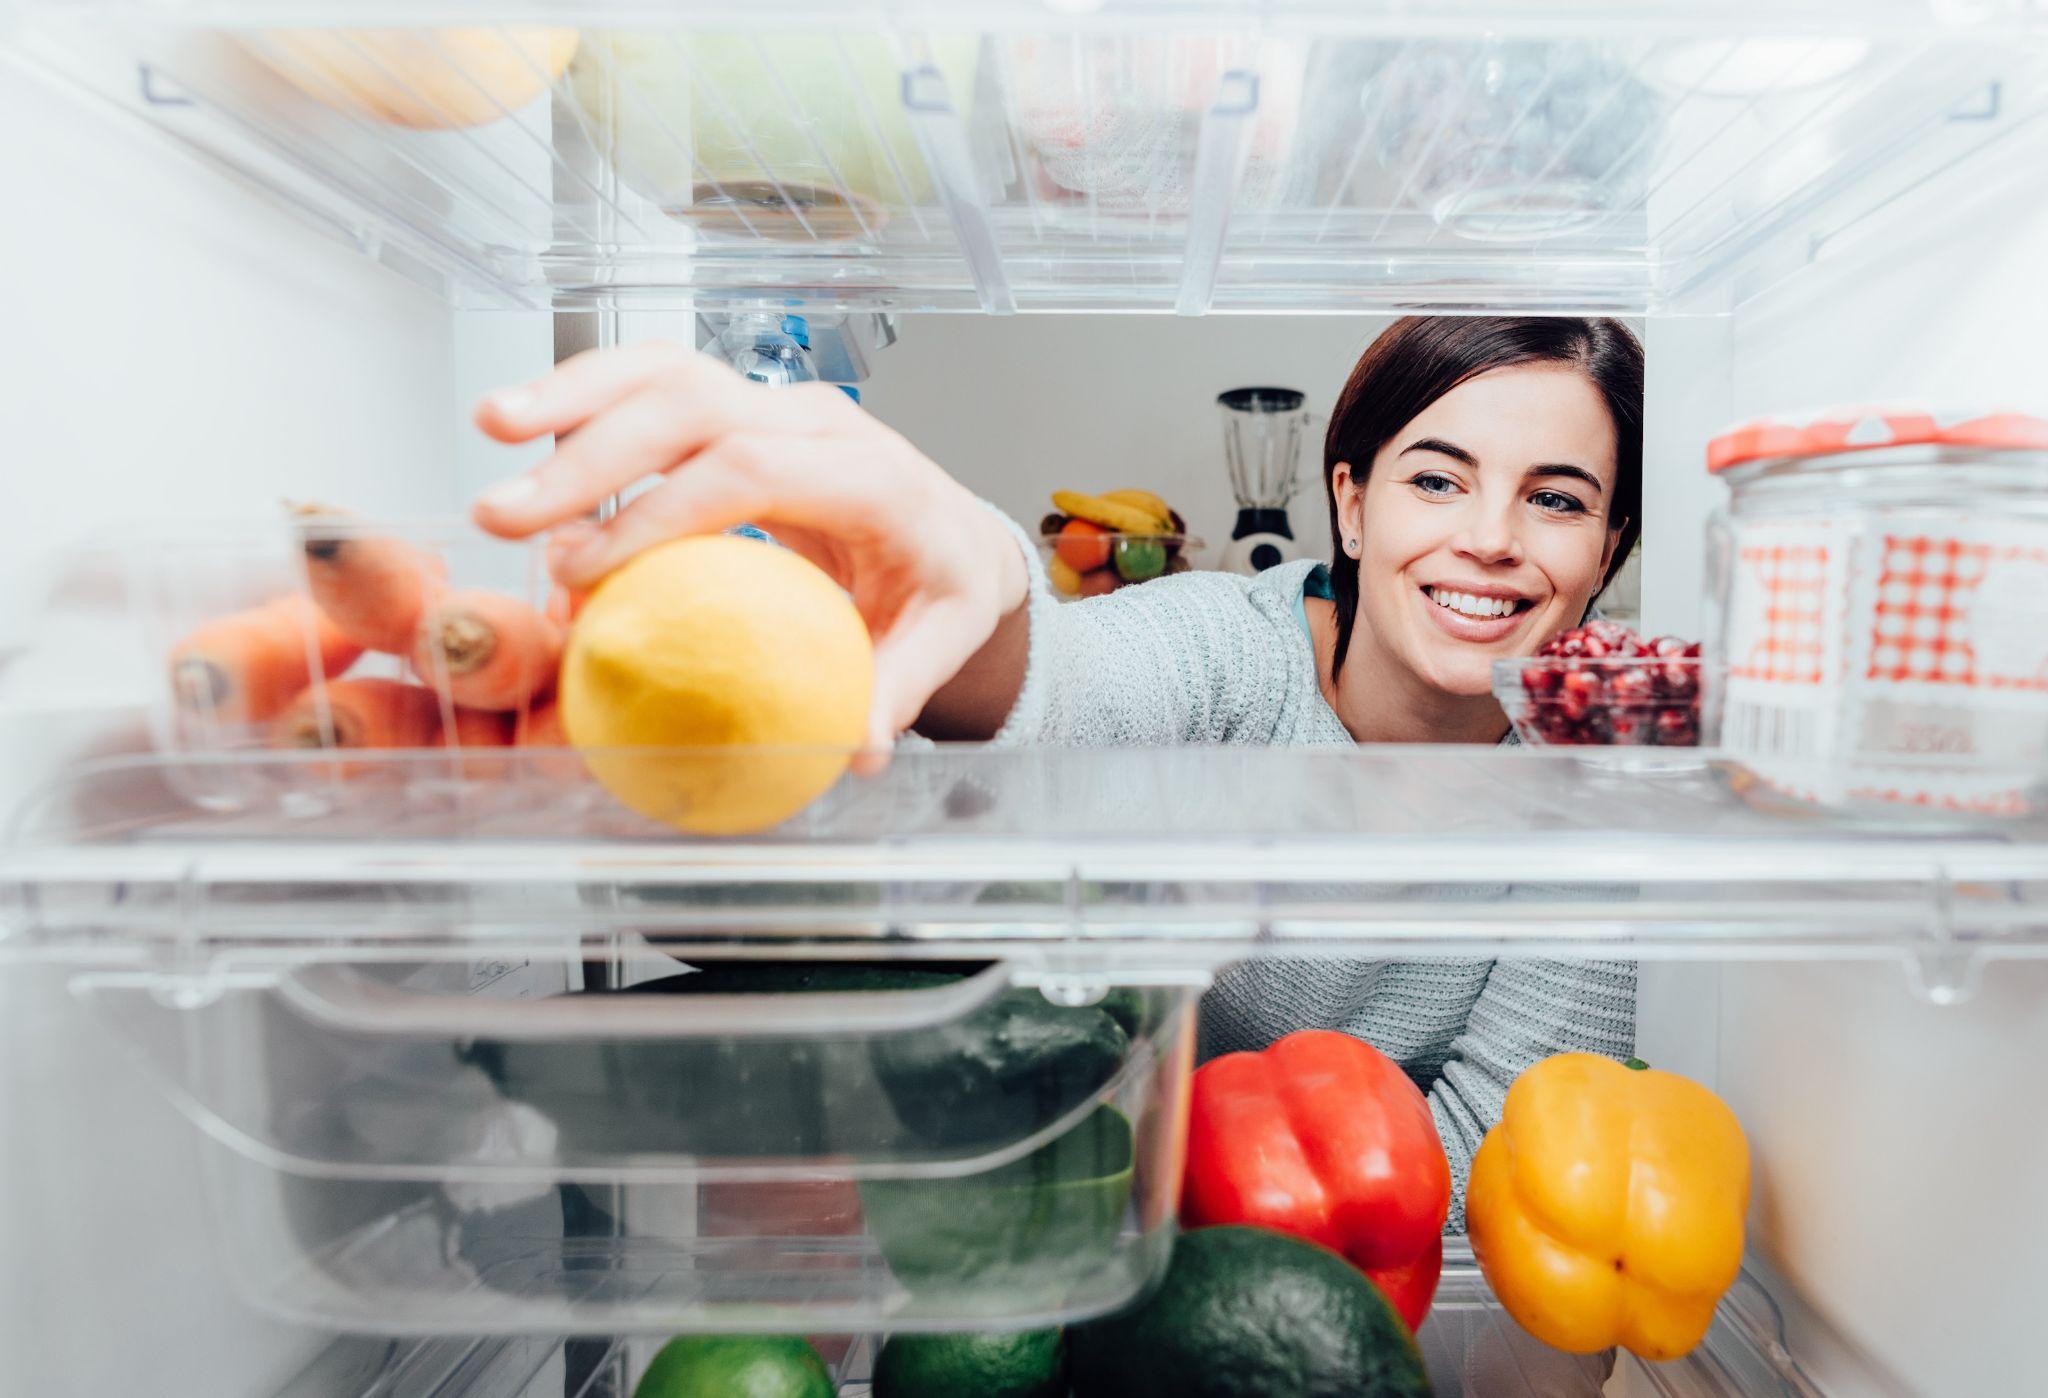 Preventative Measures: How to Keep Your Fridge Smelling Fresh All Year Round